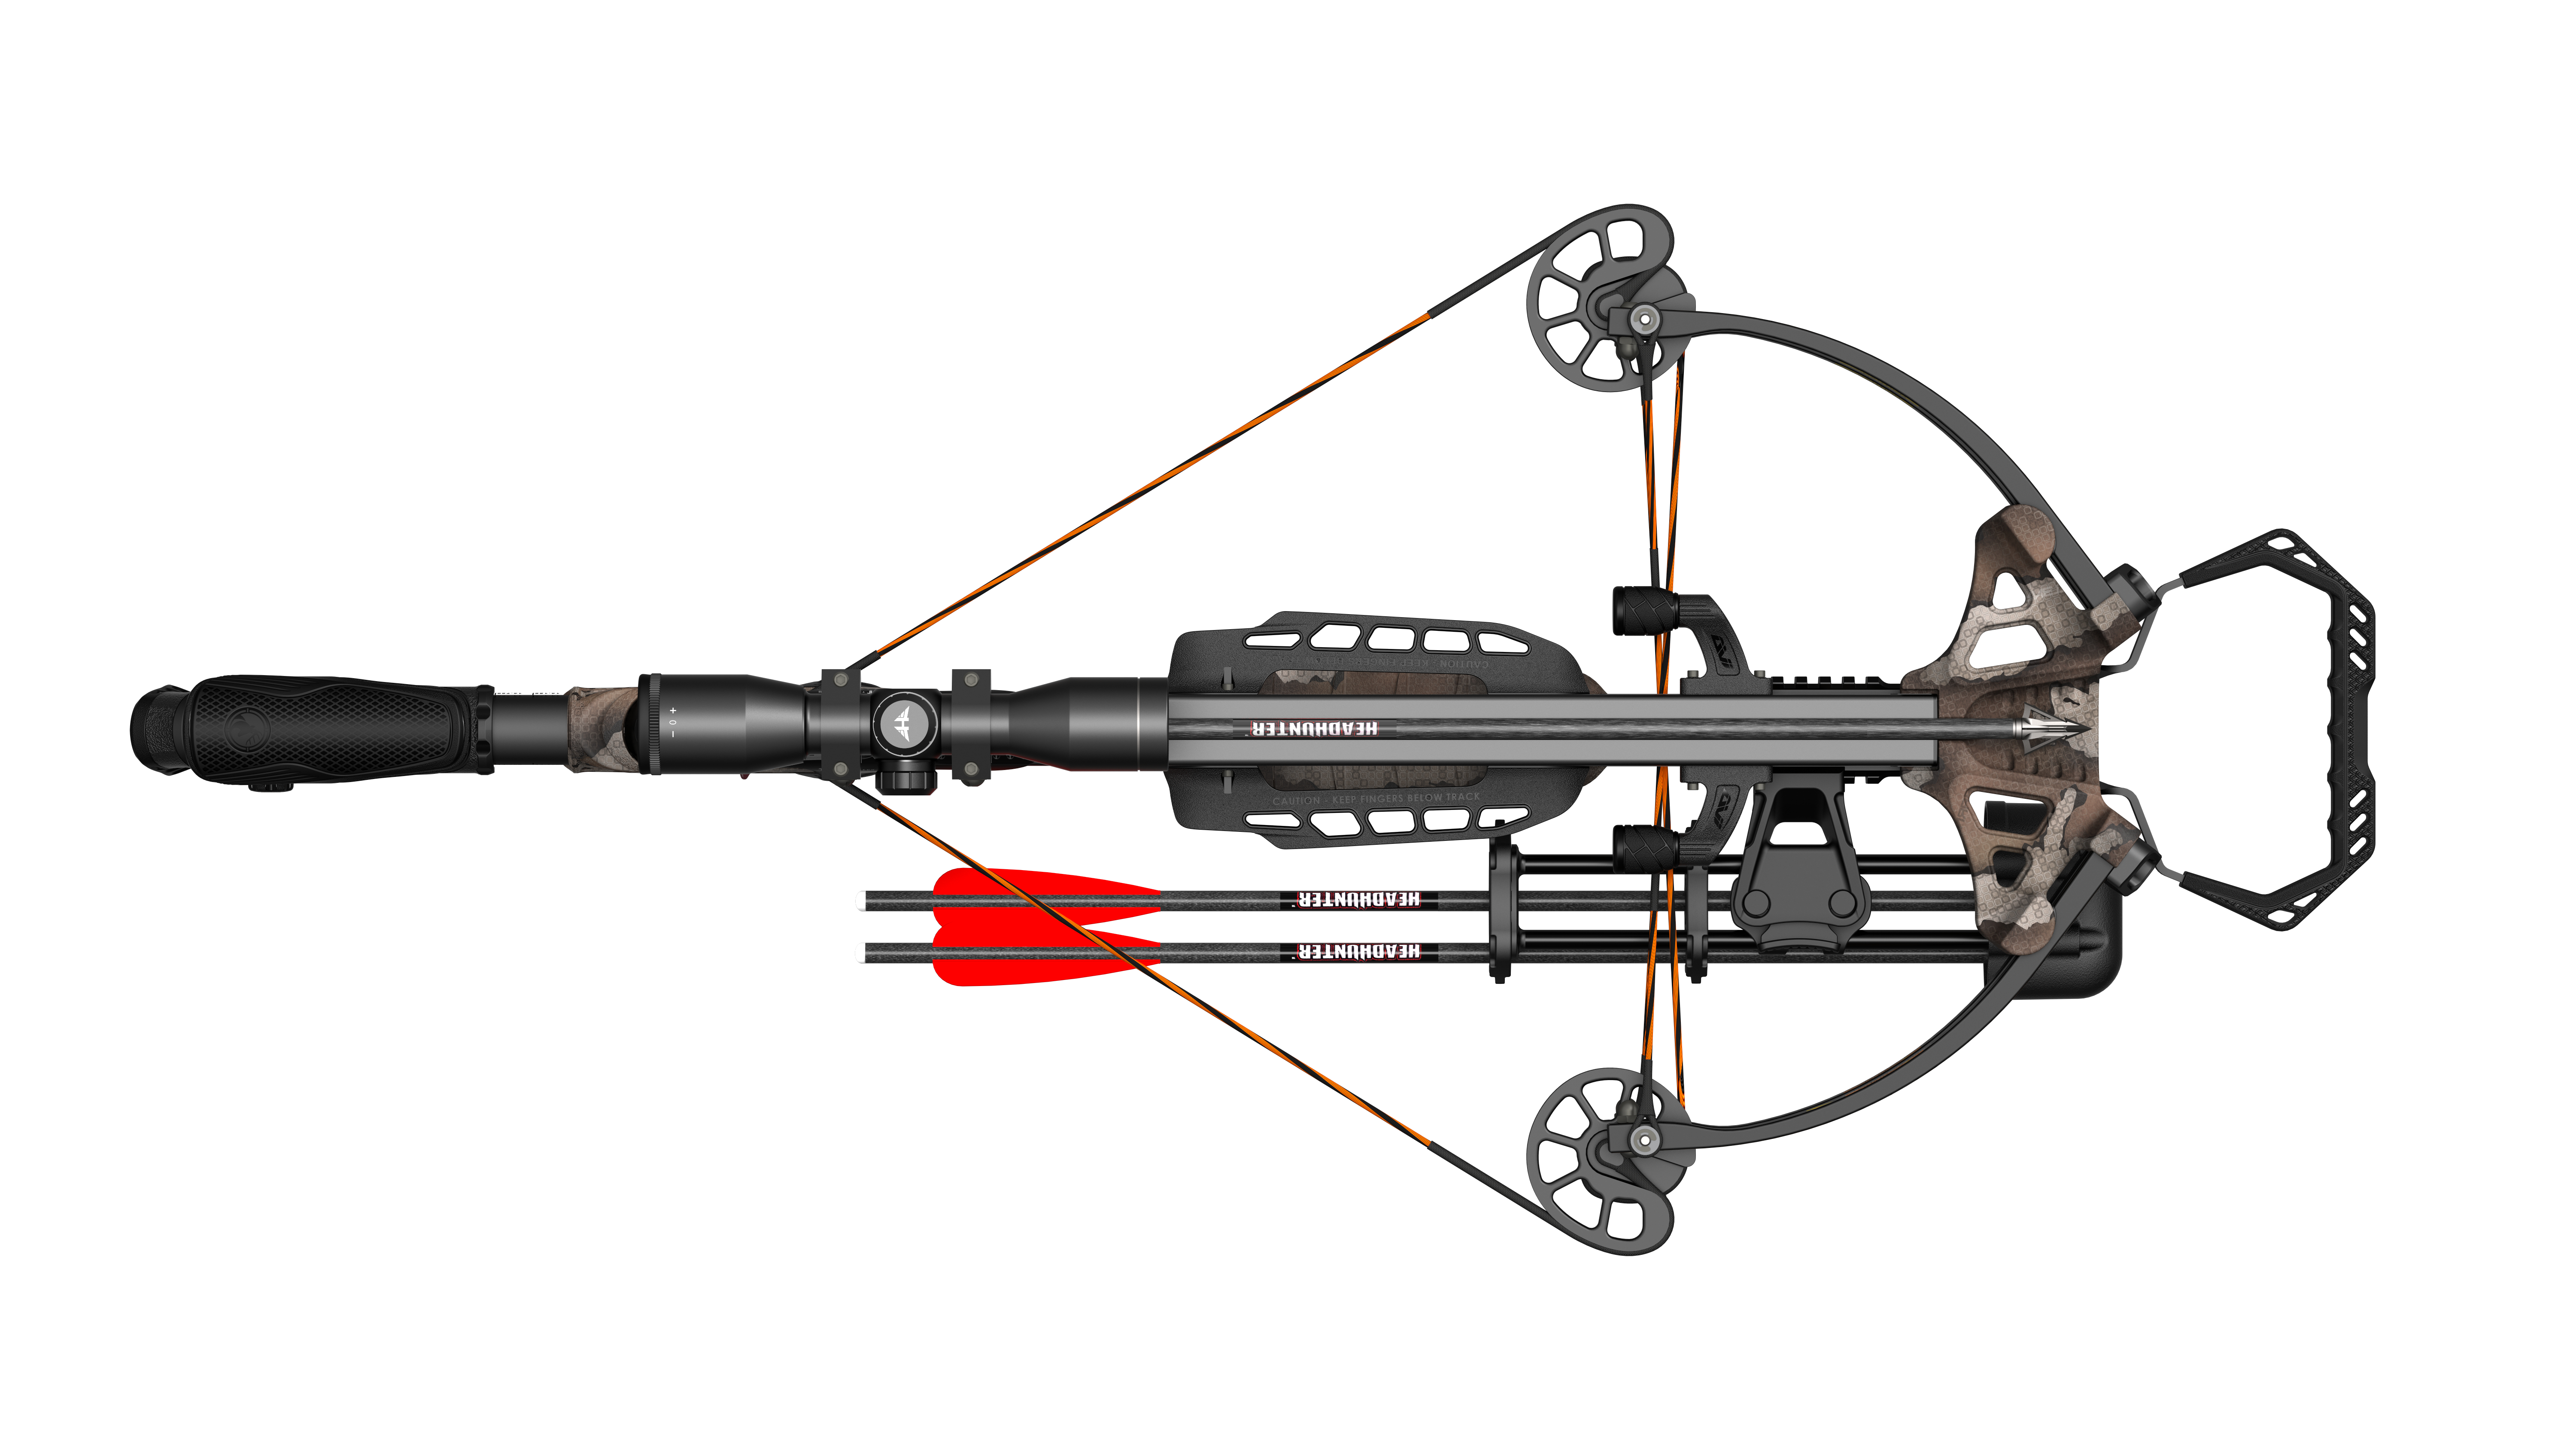 BAR XP400 XBOW Barnett Expedition 400 Crossbow, Crank Cocking Device Included, 400 FPS - image 4 of 9